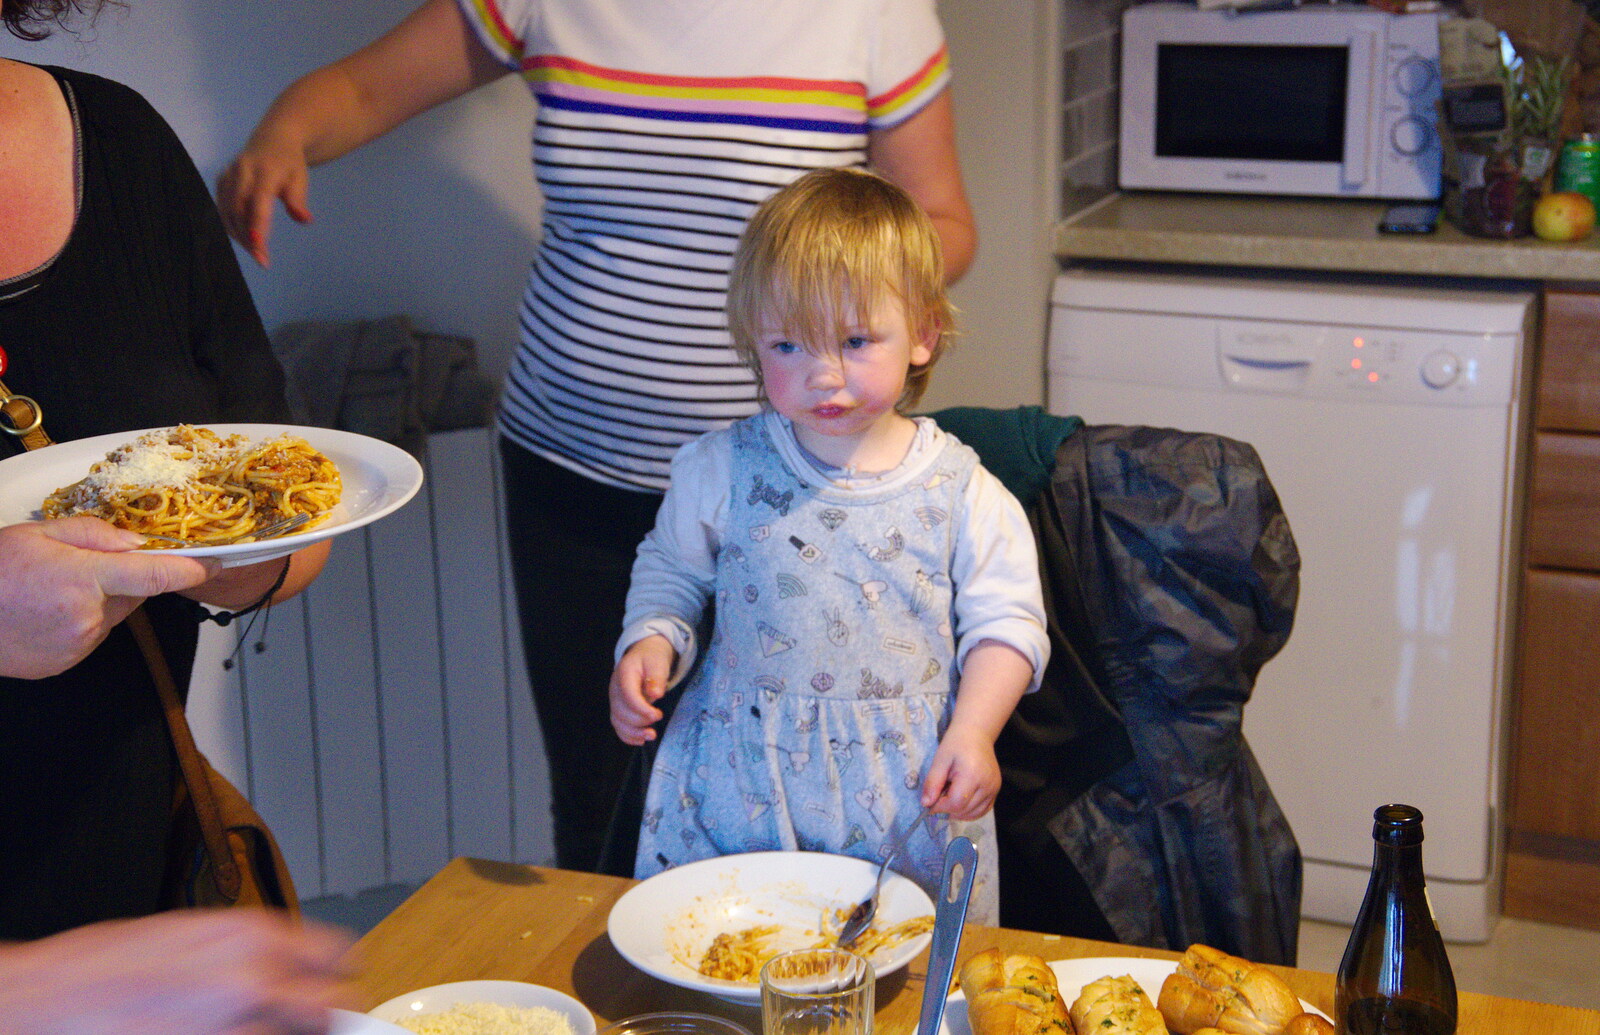 Baby Ra-ra has some pasta from Travels in the Borderlands: An Blaic/Blacklion to Belcoo and back, Cavan and Fermanagh, Ireland - 22nd August 2019